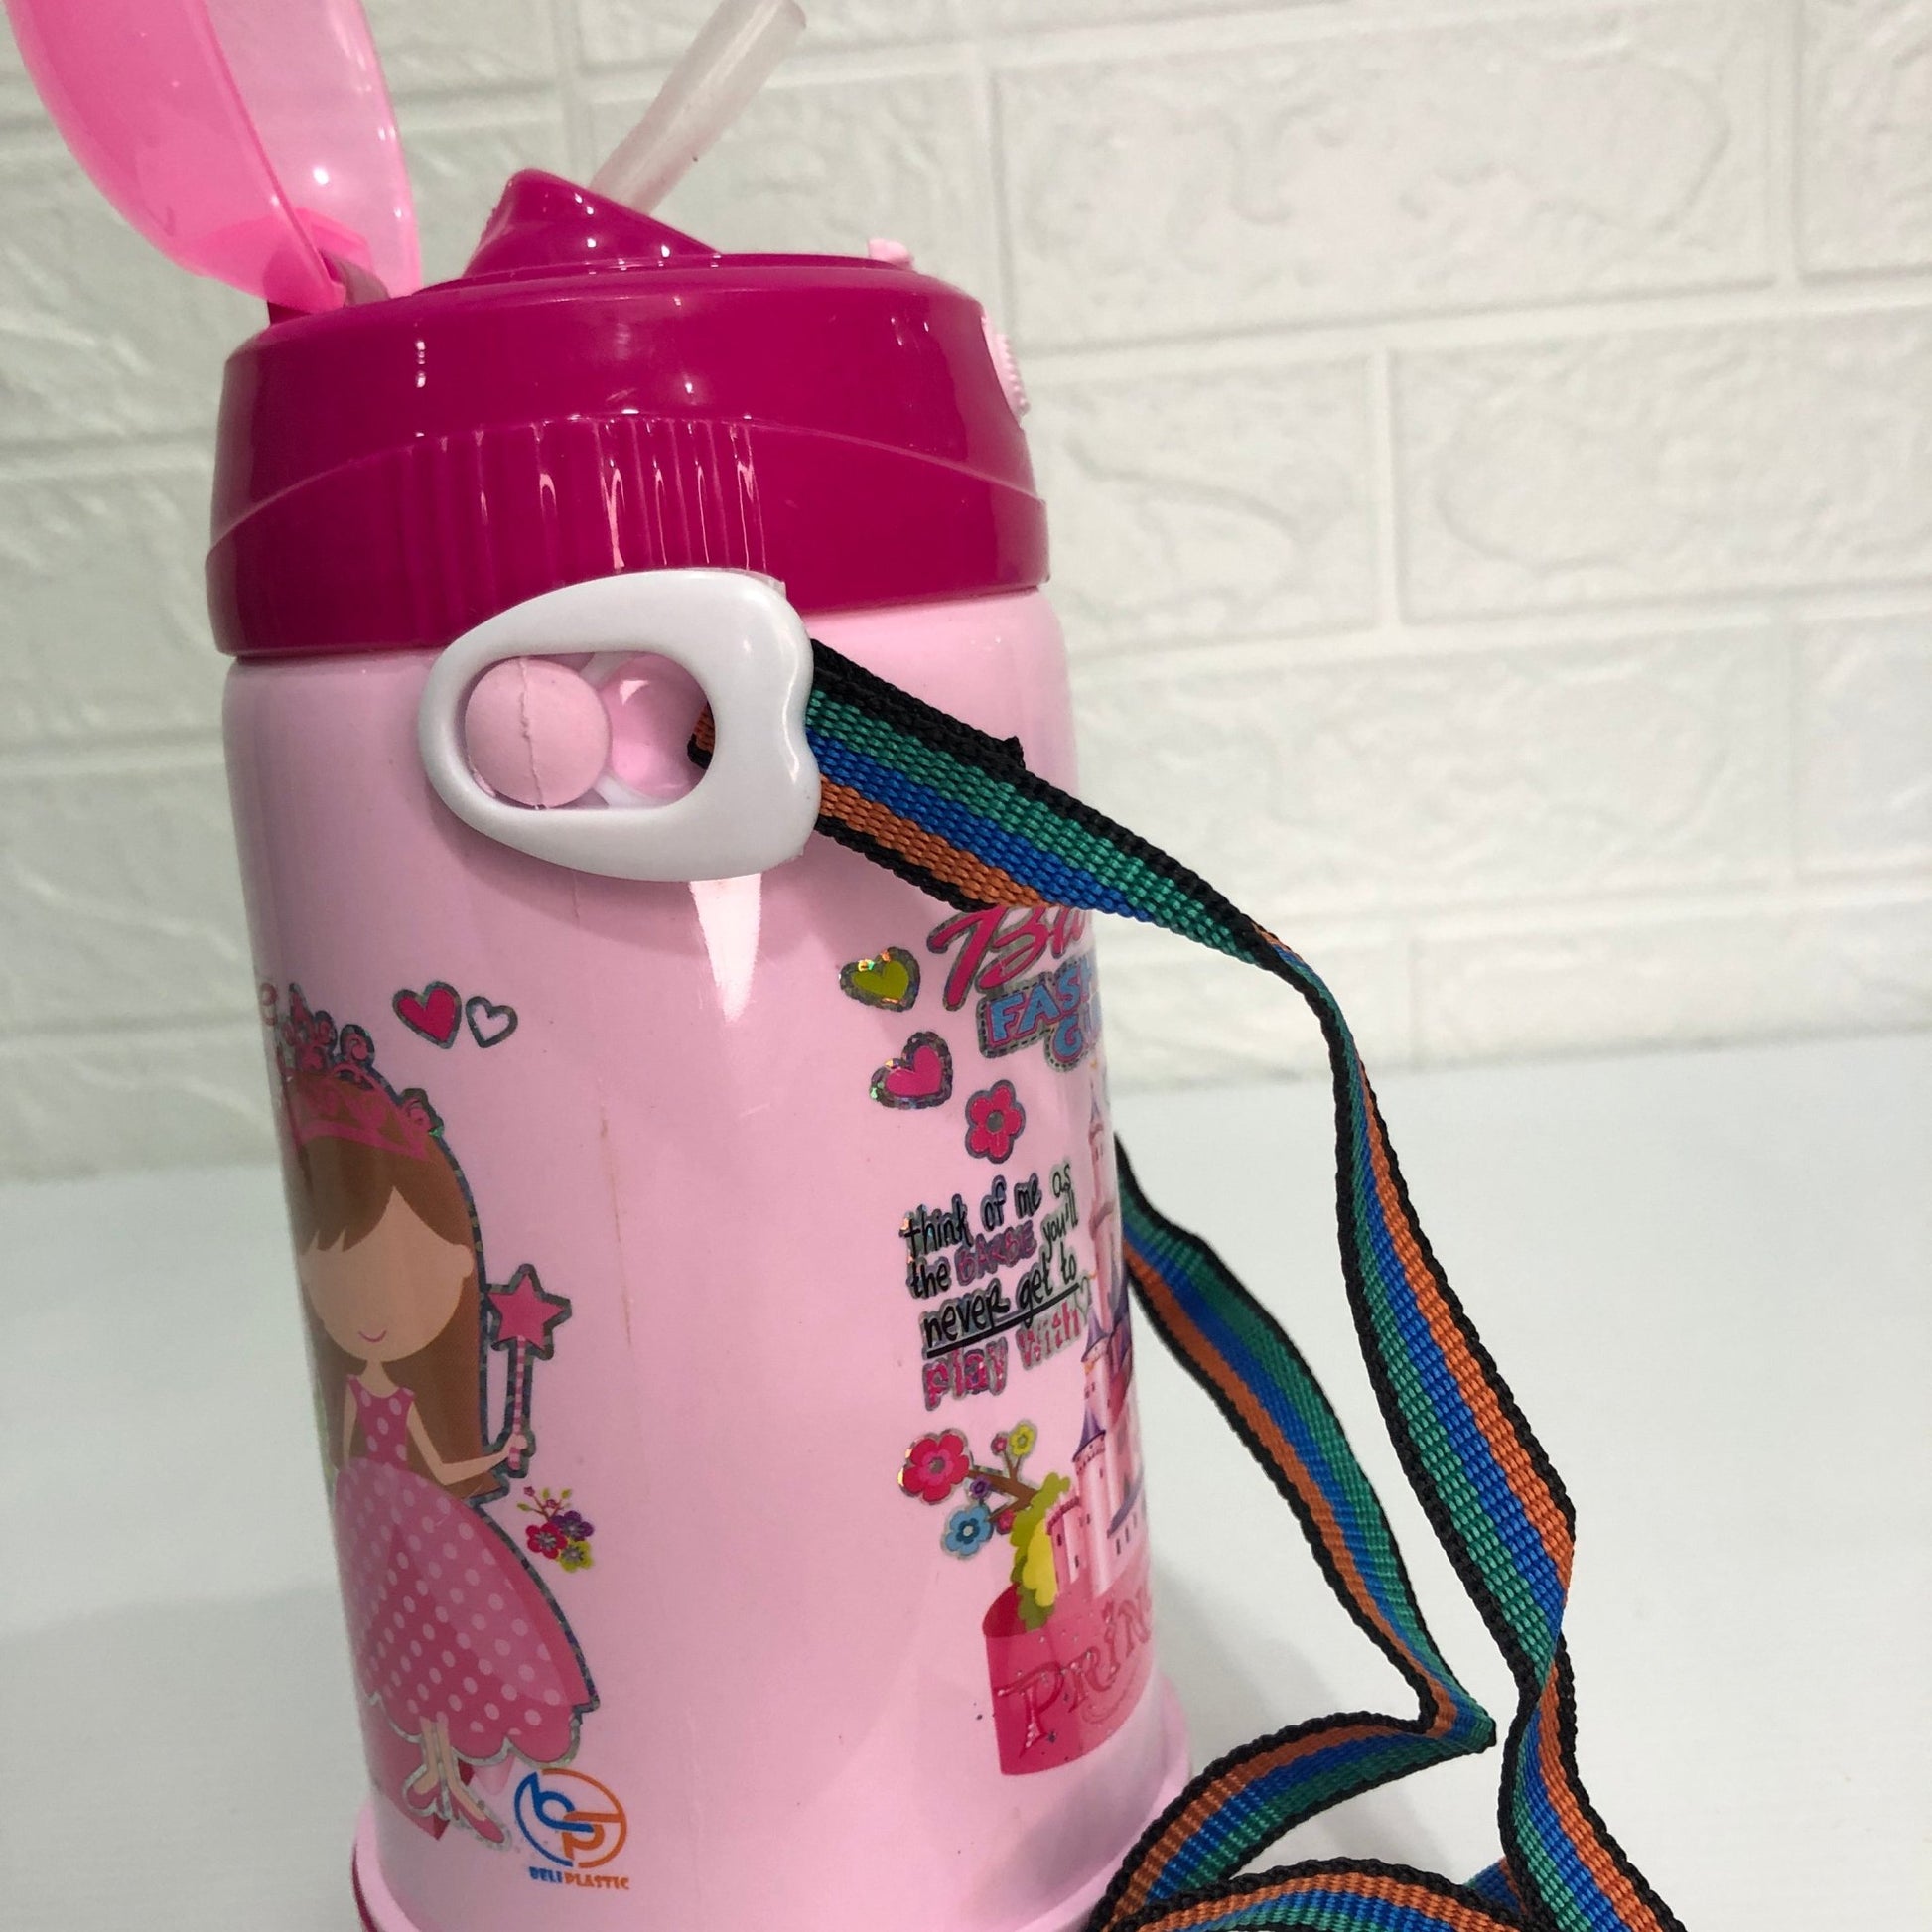 Kids School Water Thermos - DS Traders